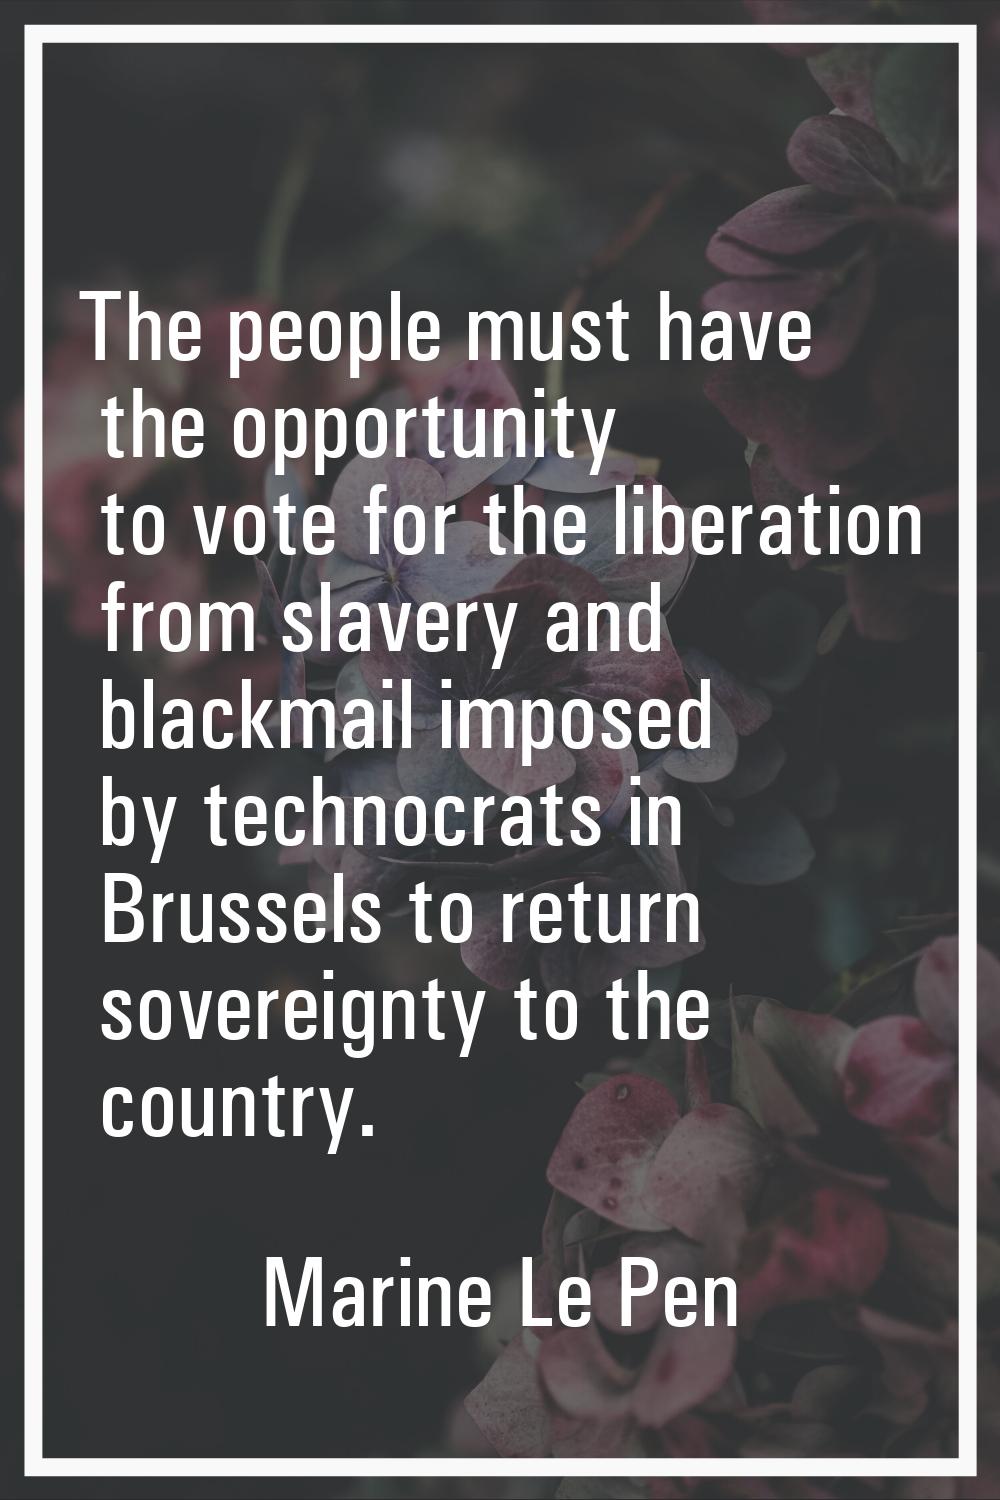 The people must have the opportunity to vote for the liberation from slavery and blackmail imposed 